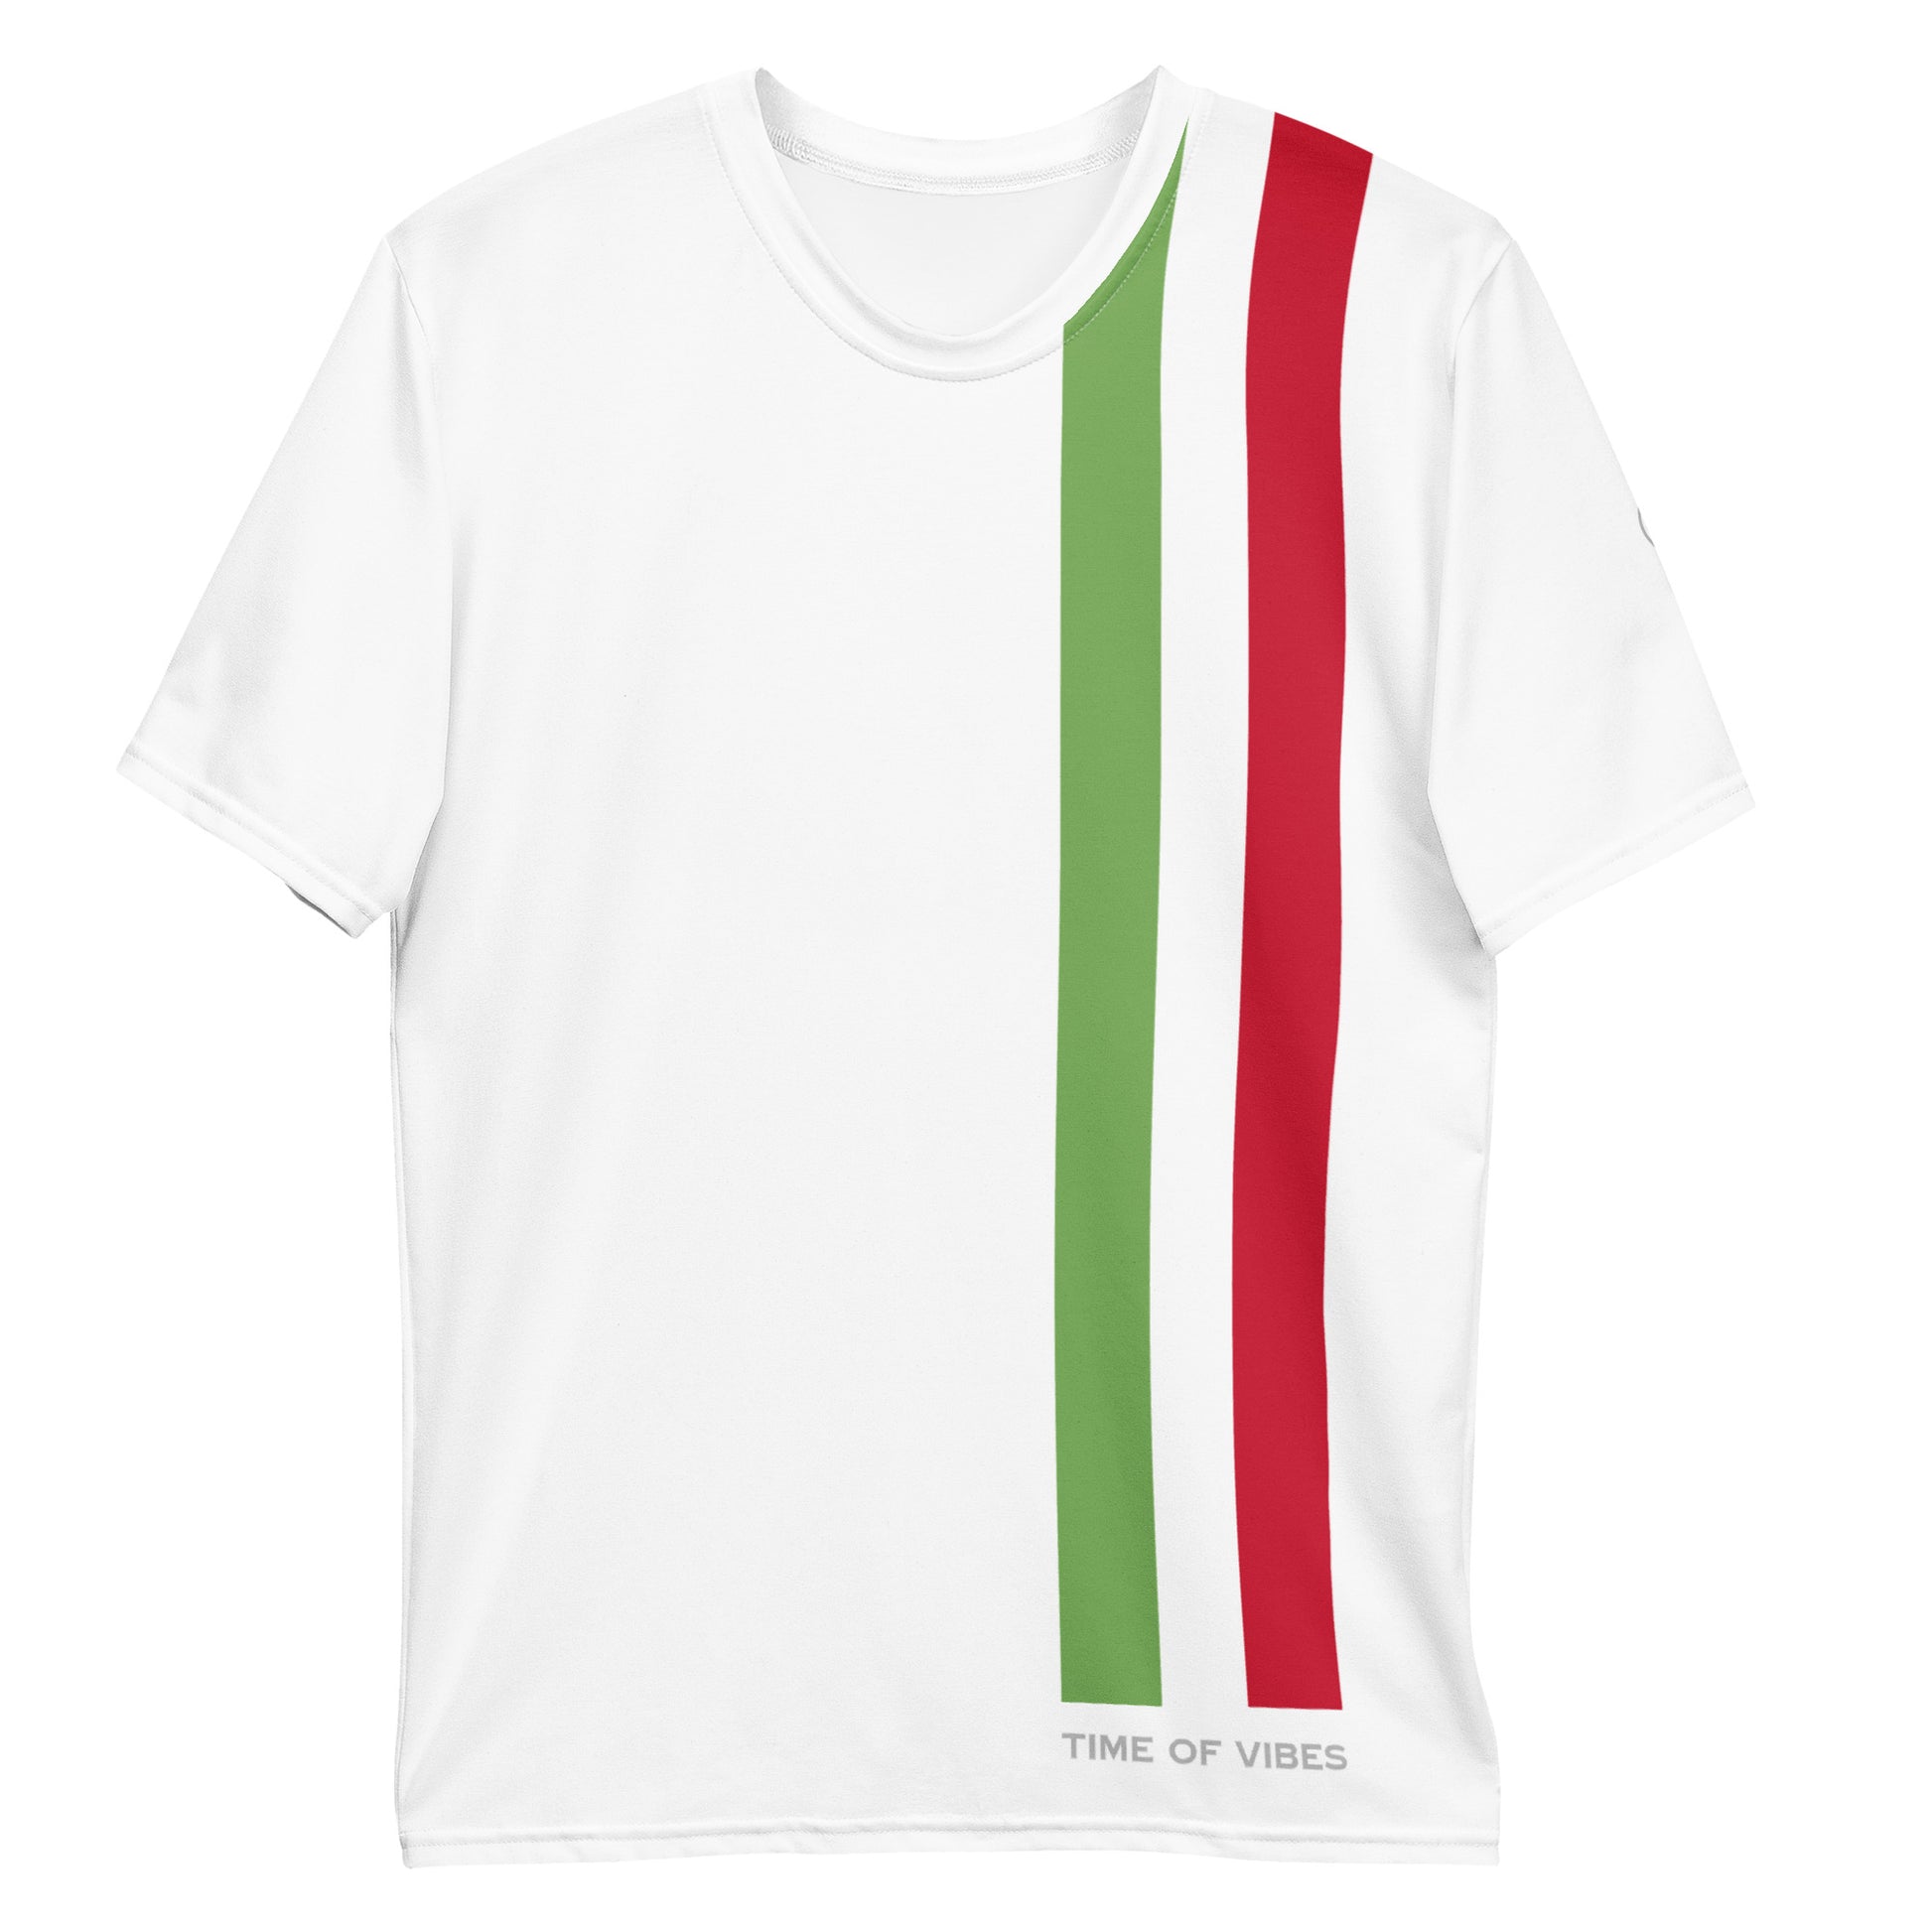 TIME OF VIBES - Premium Men's t-shirt ITALY - €49.00